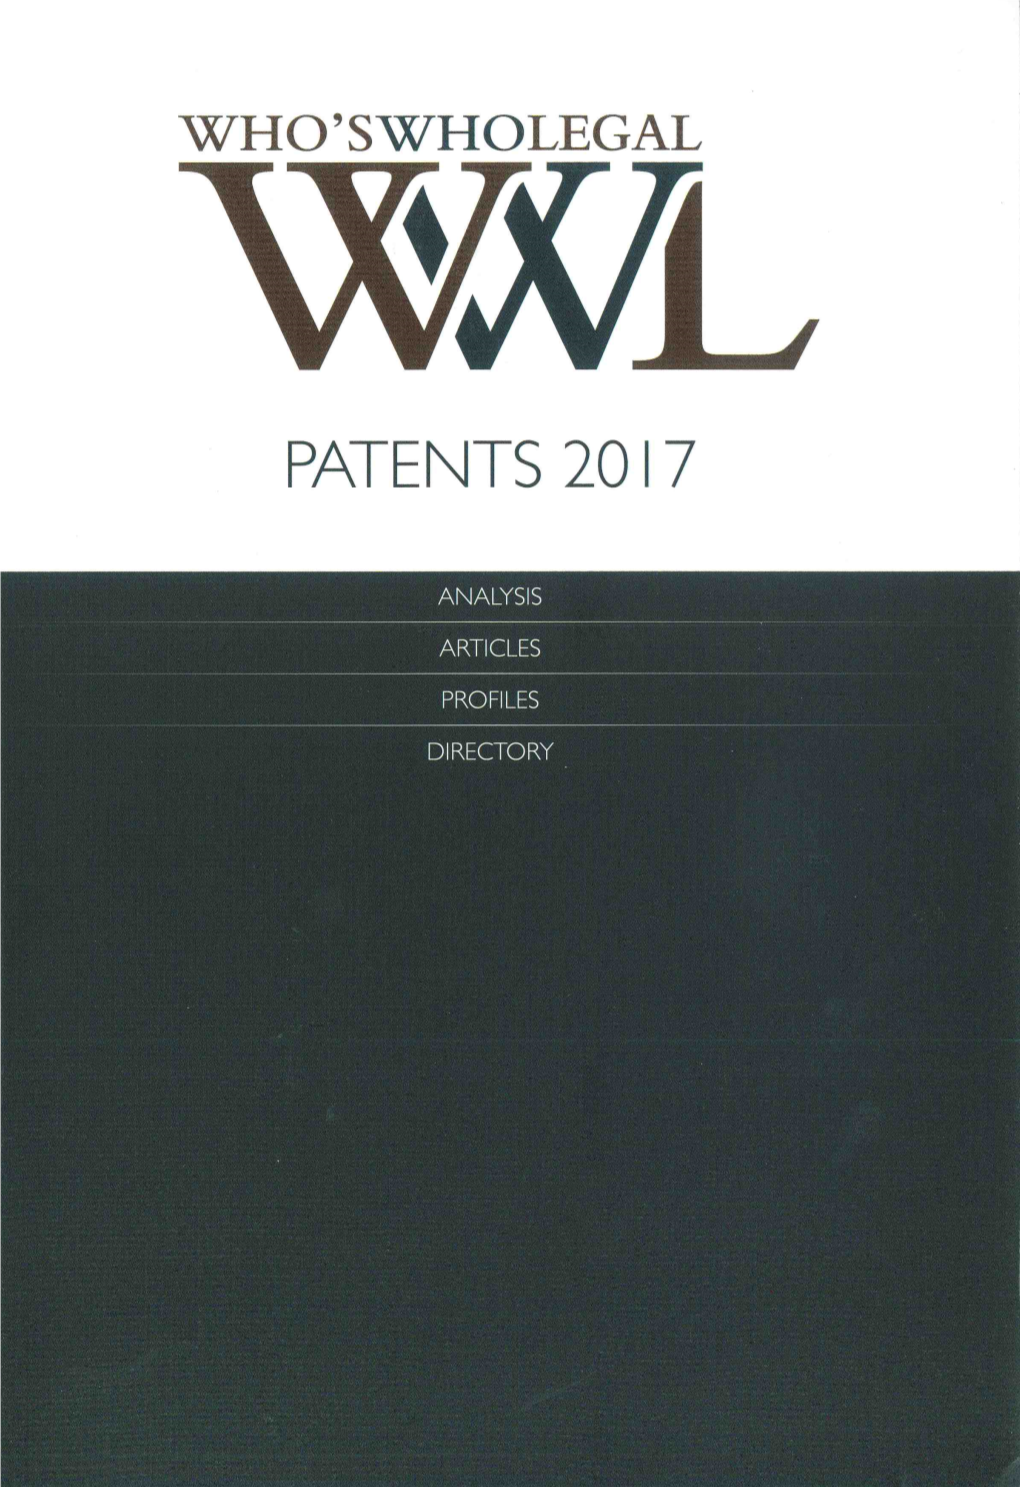 WHO'swholegal PATENTS 2017 Www